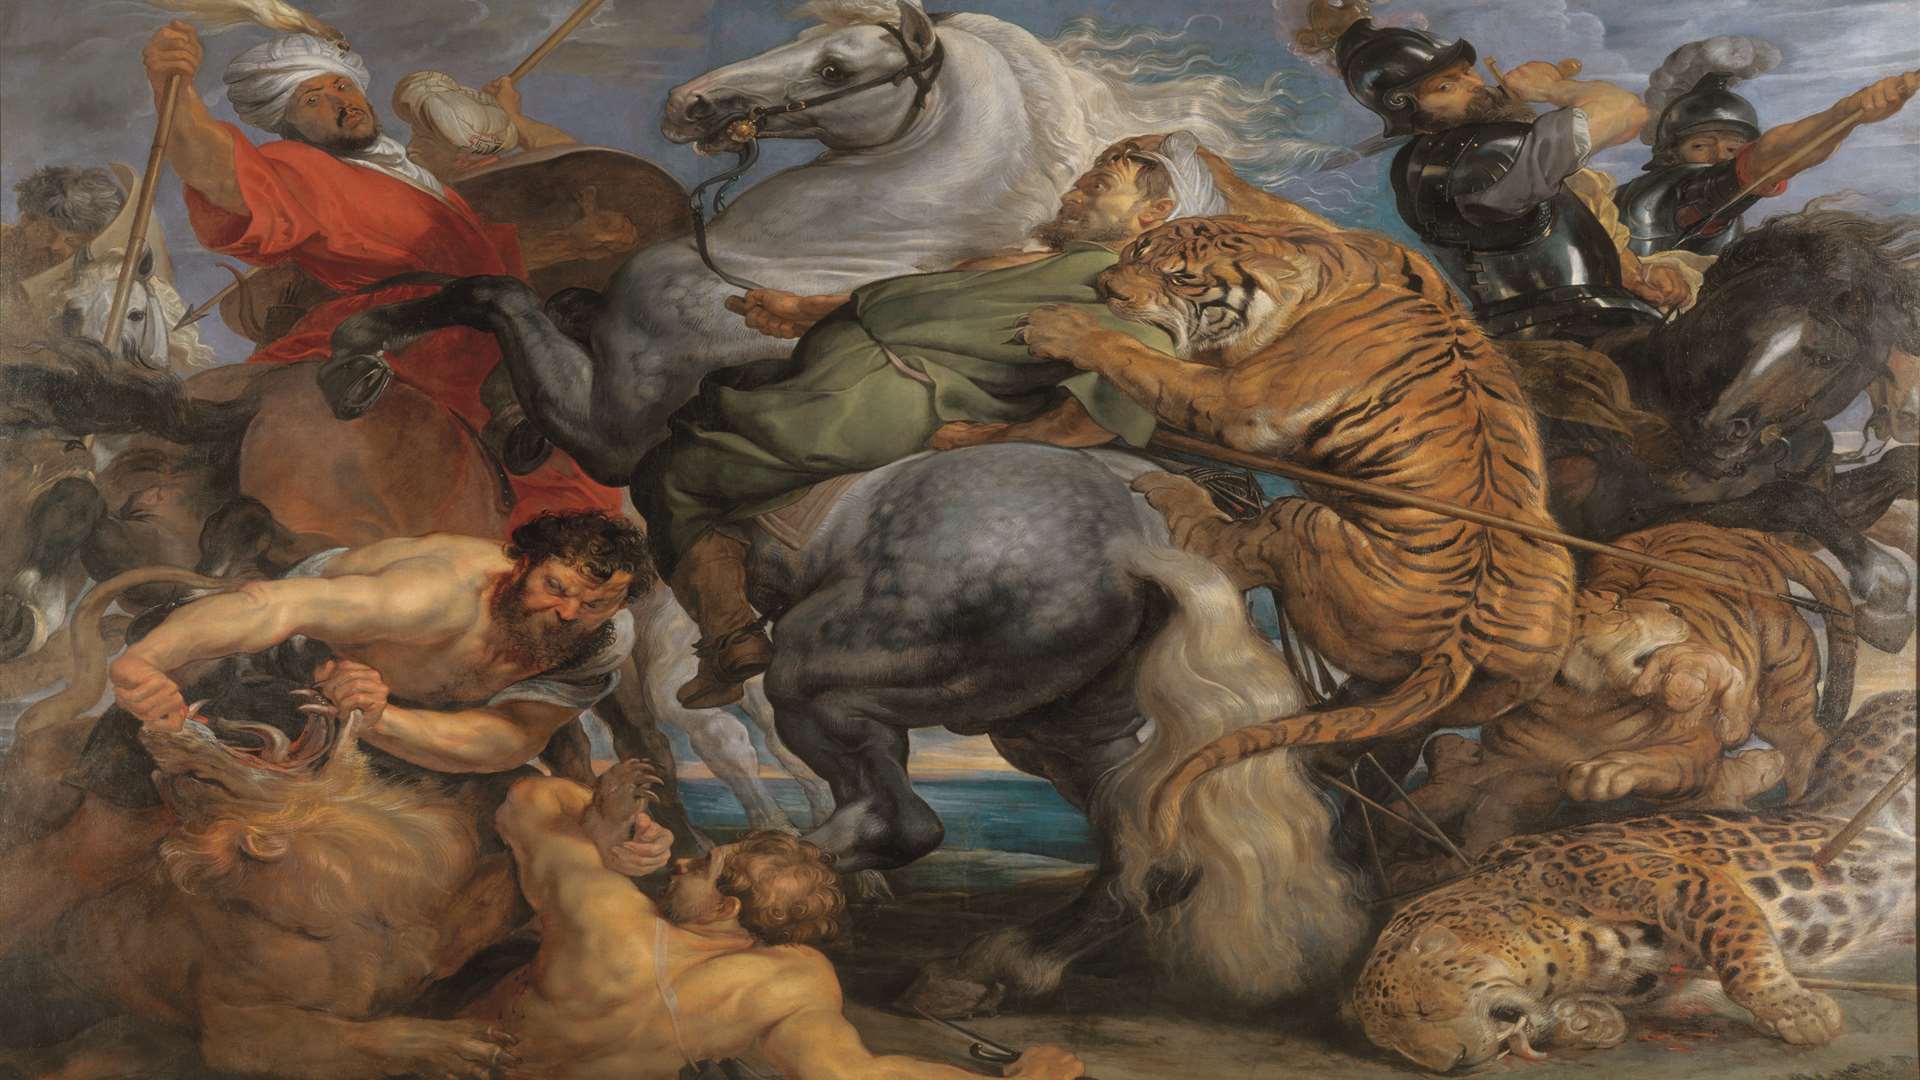 Tiger, Lion and Leopard Hunt by Rubens - part of the new exhibition at the Royal Academy